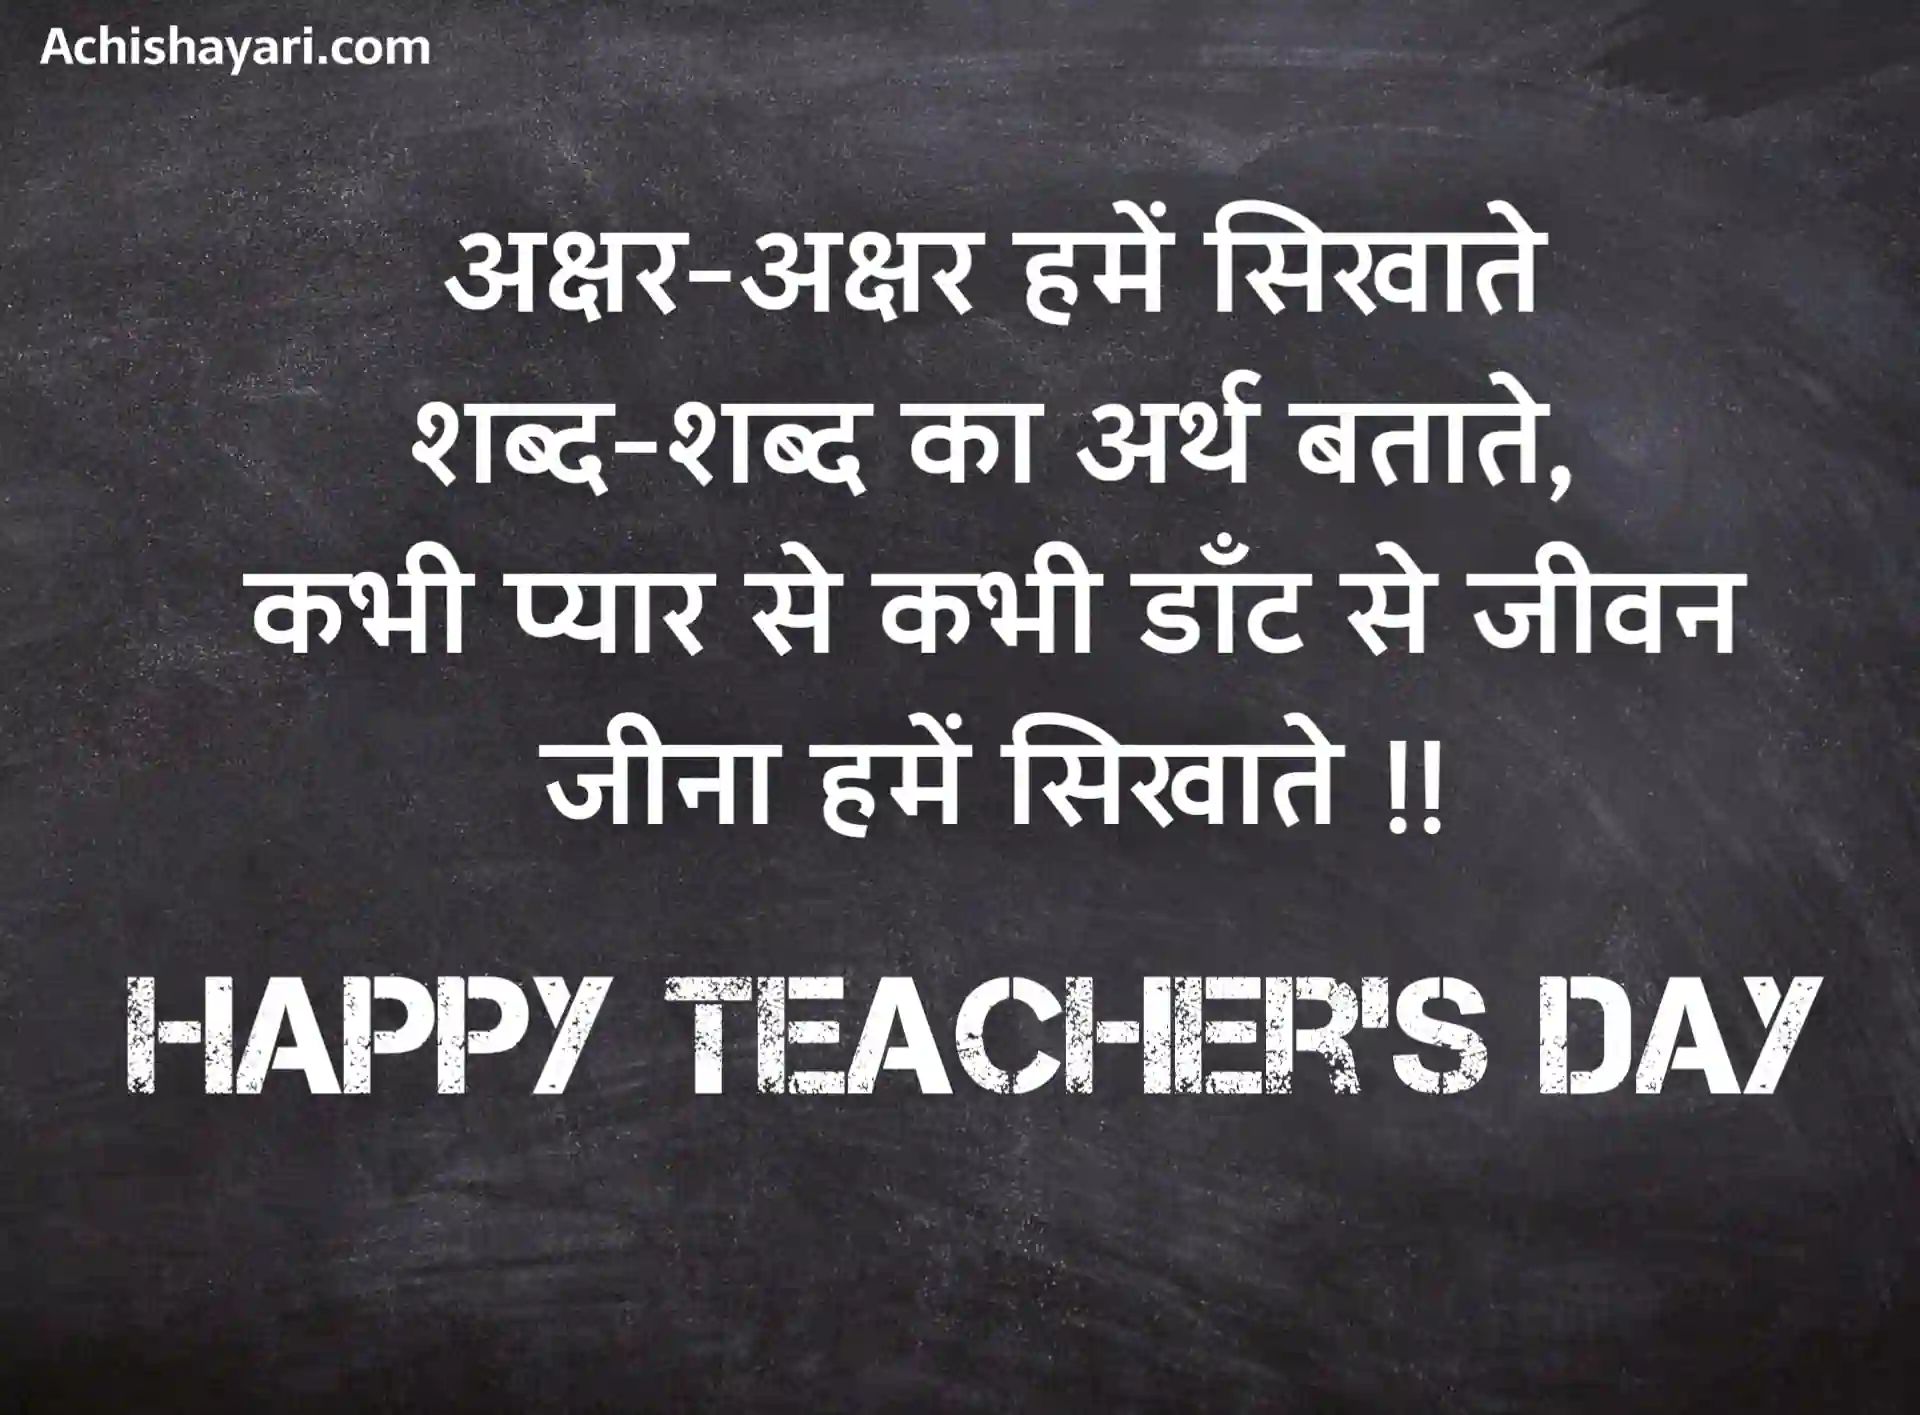 Teachers Day Quotes in Hindi Image